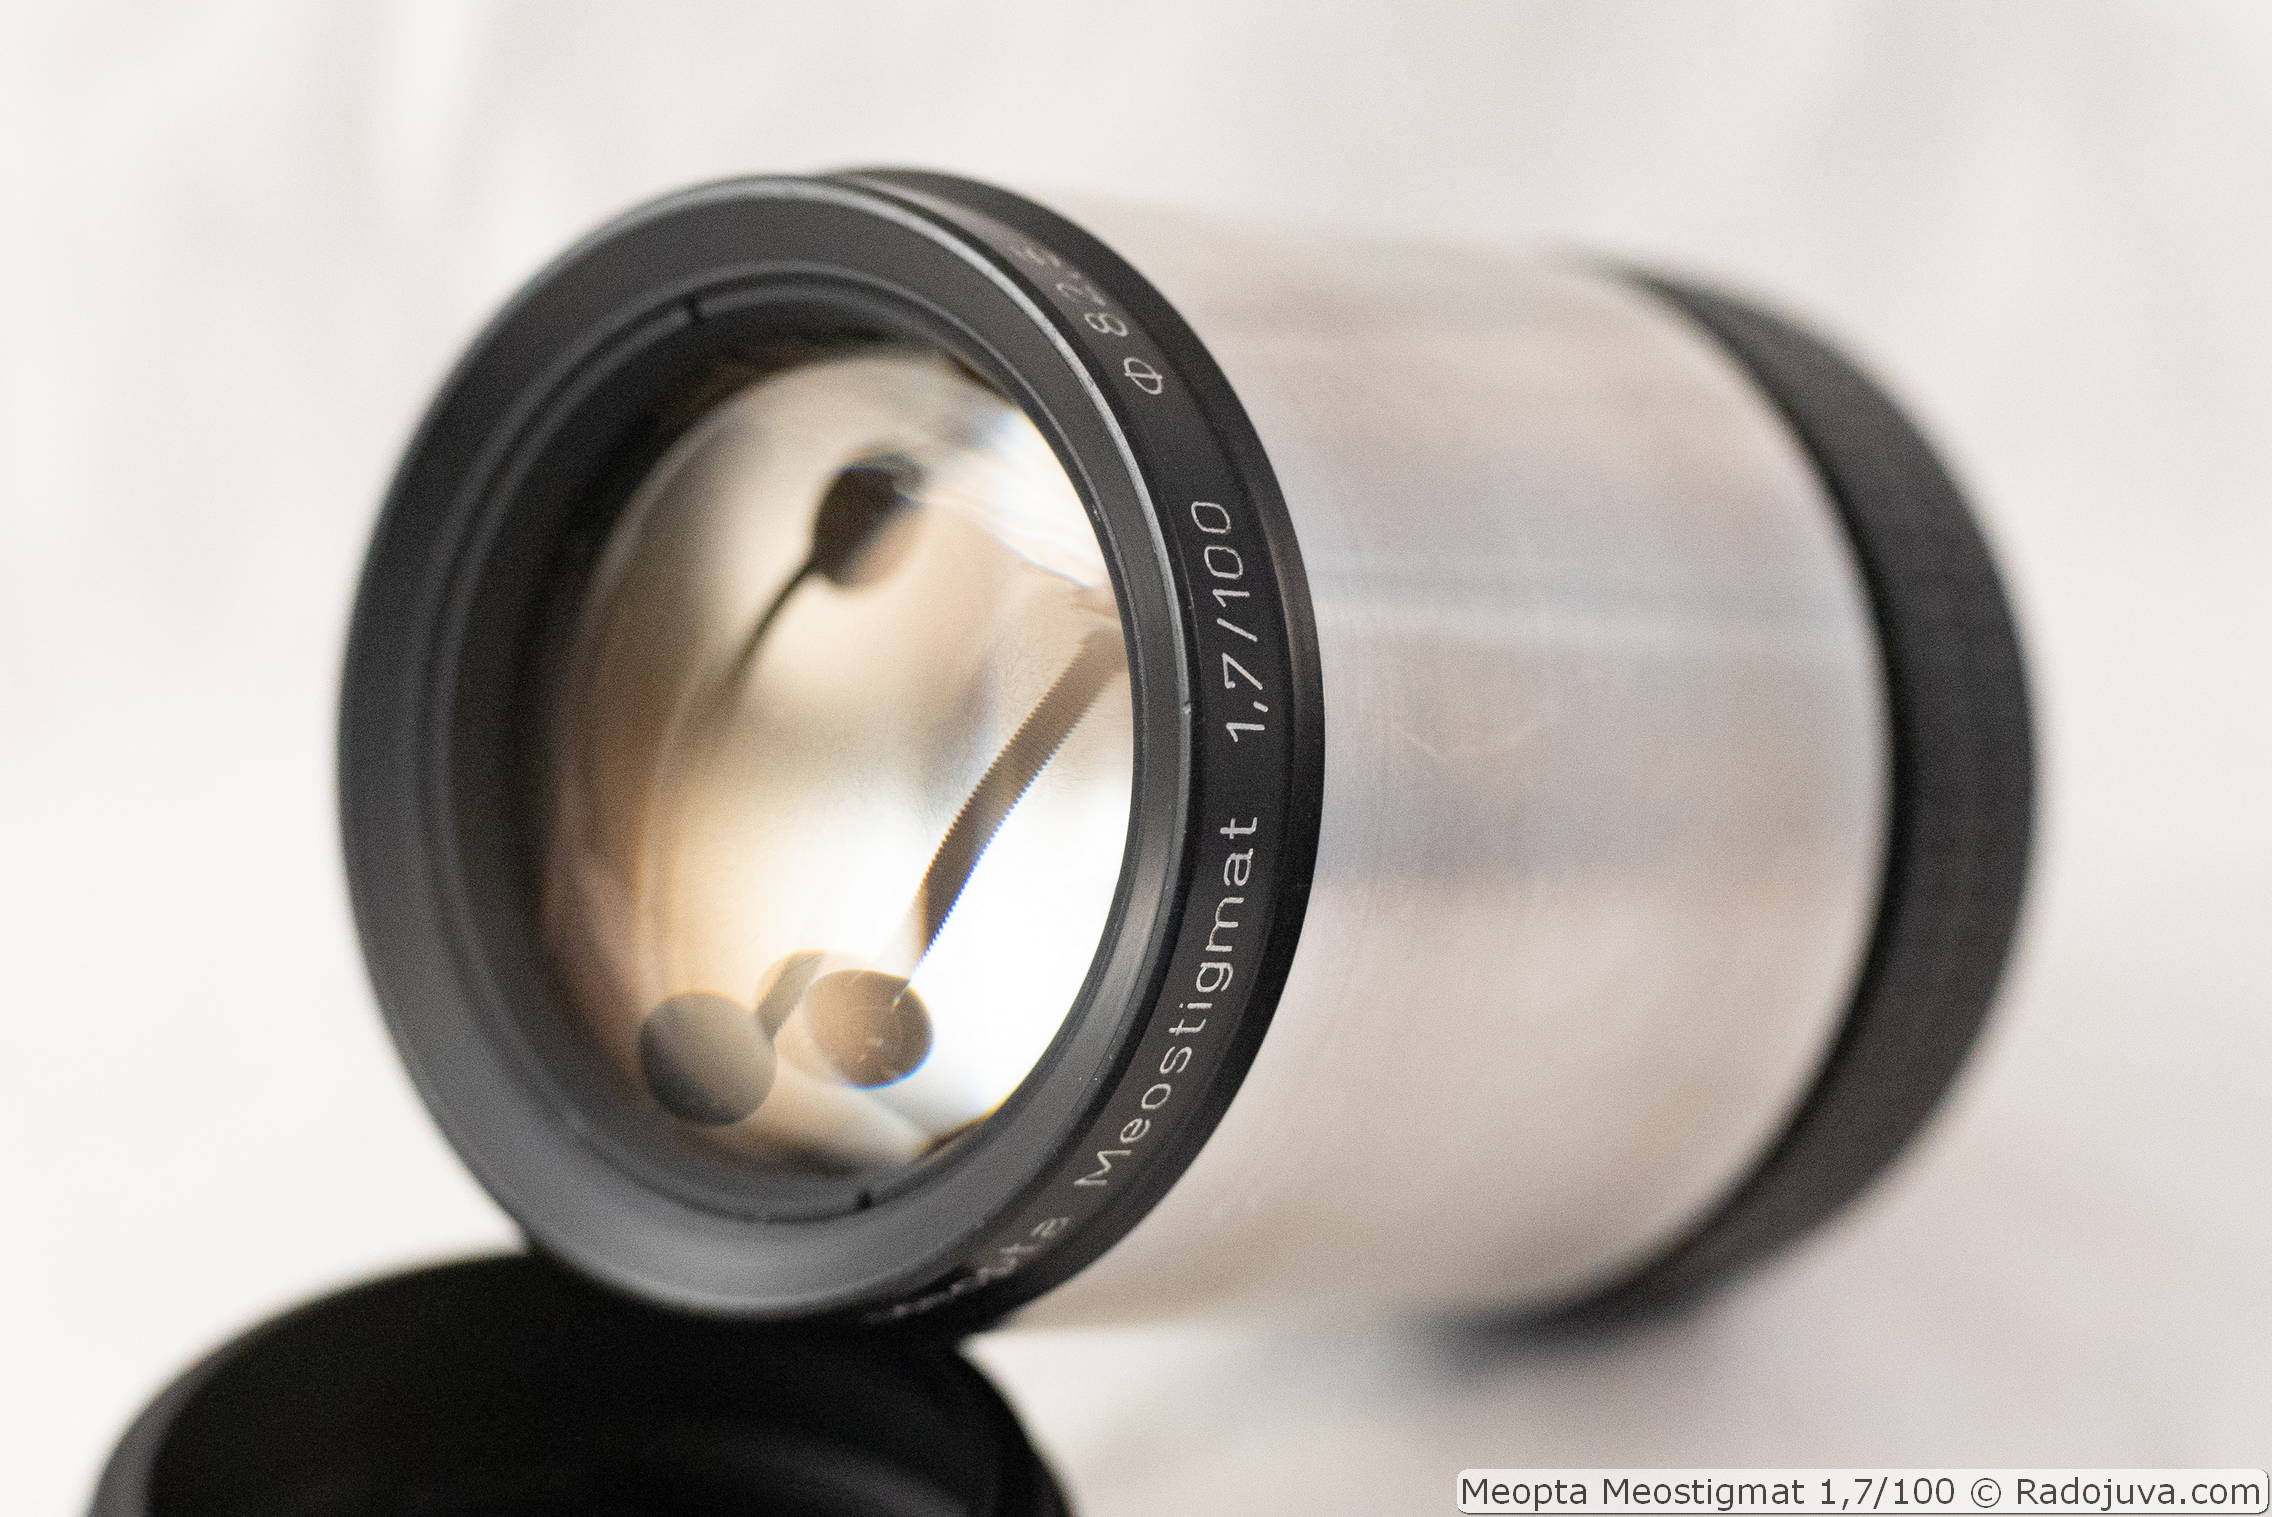 View of the lens block Meopta Meostigmat 100 / 1.7, installed in the behind-the-lens focusing mechanism.